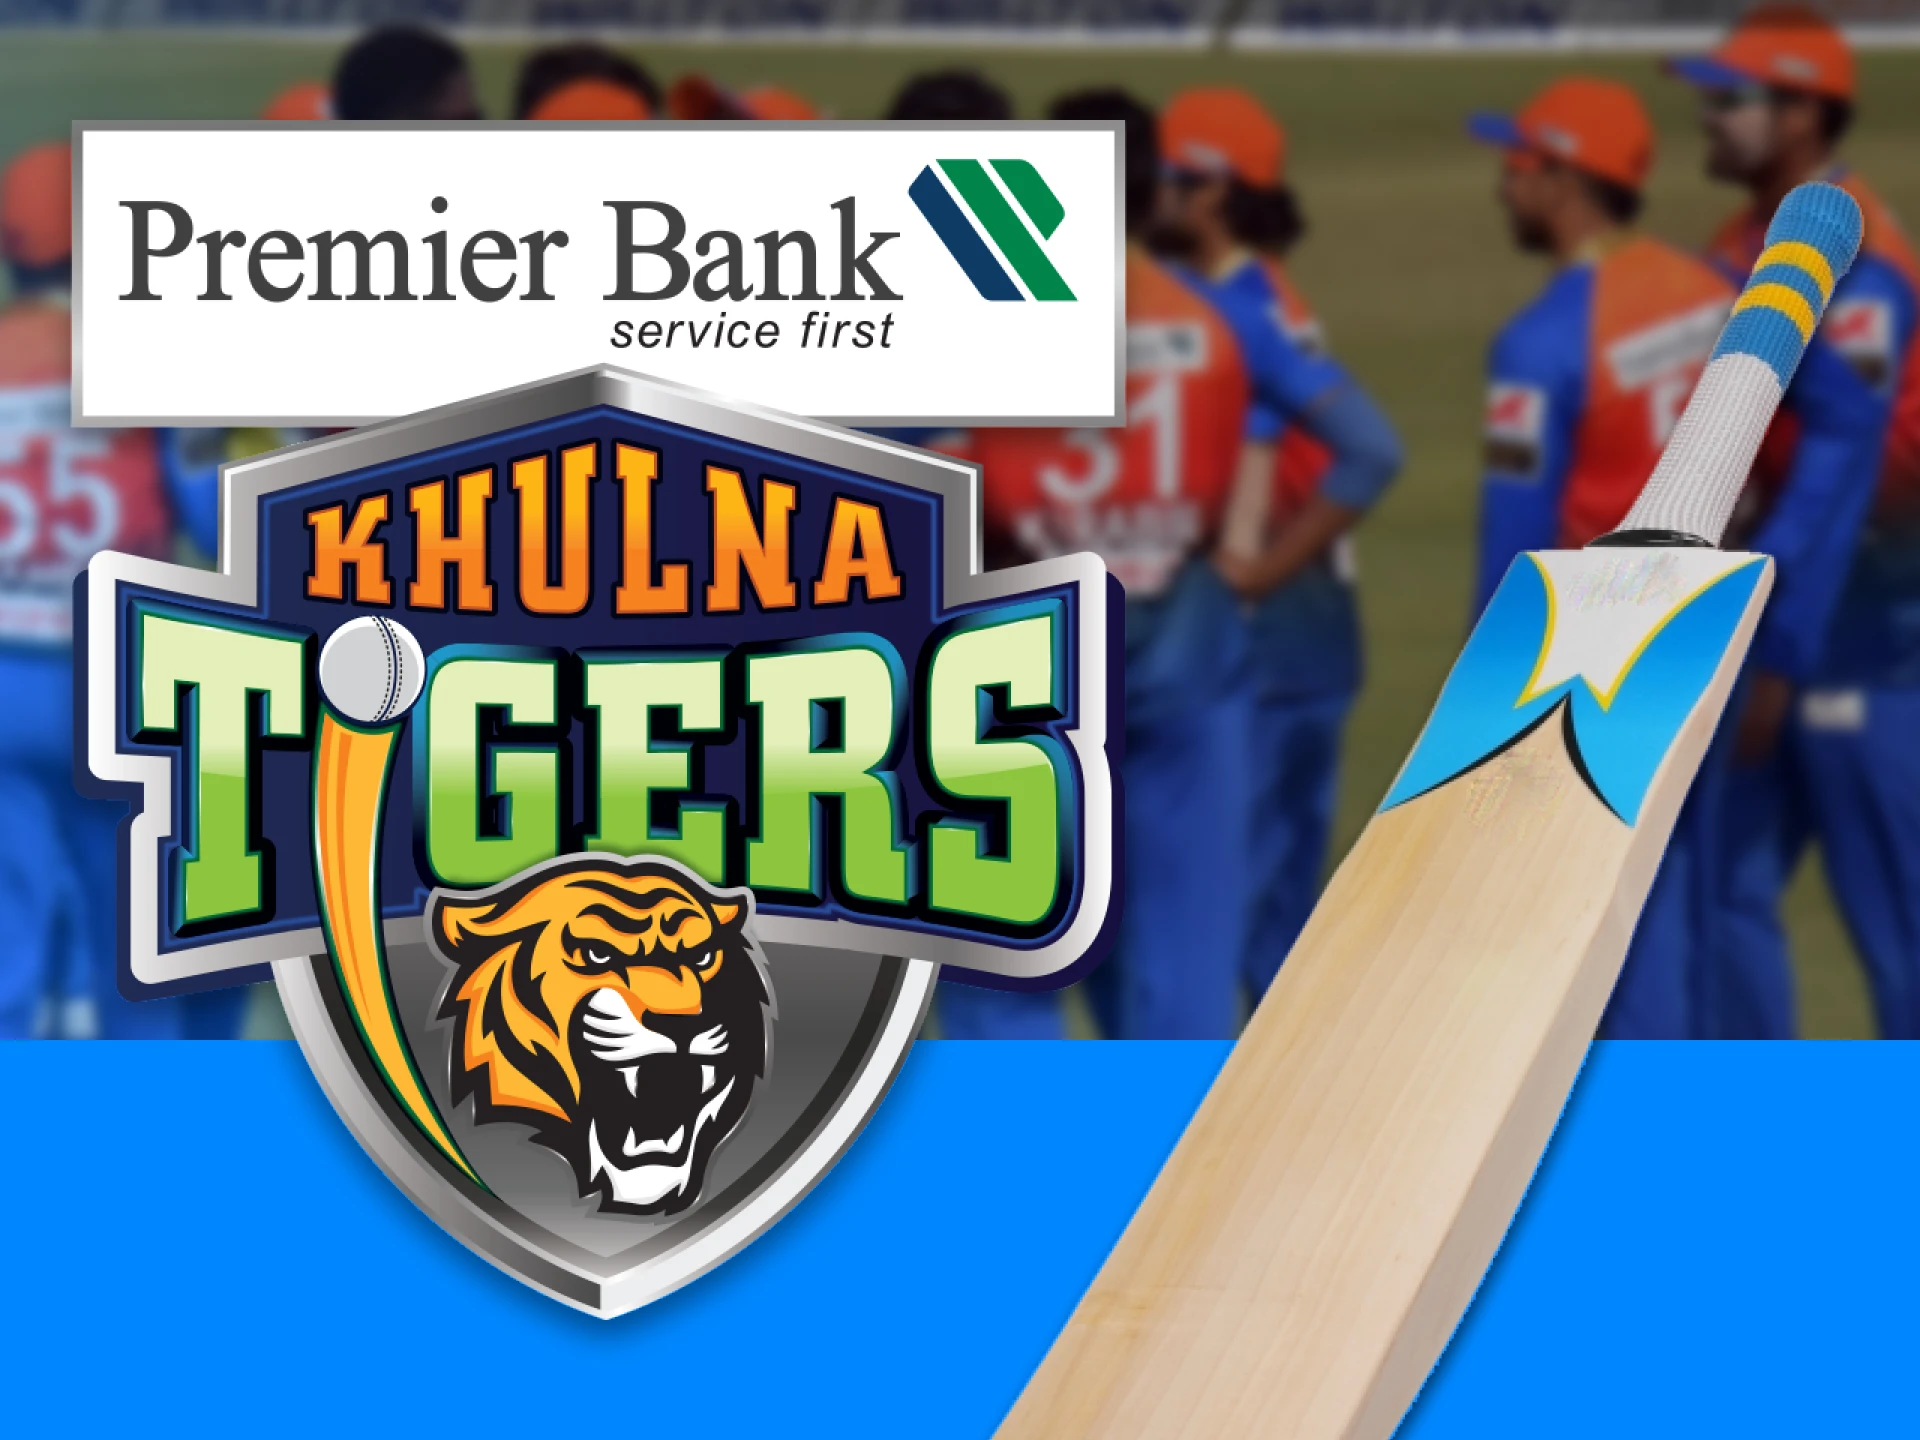 The Khulna Tigers team represents Khulna Division in the BPL tournament.